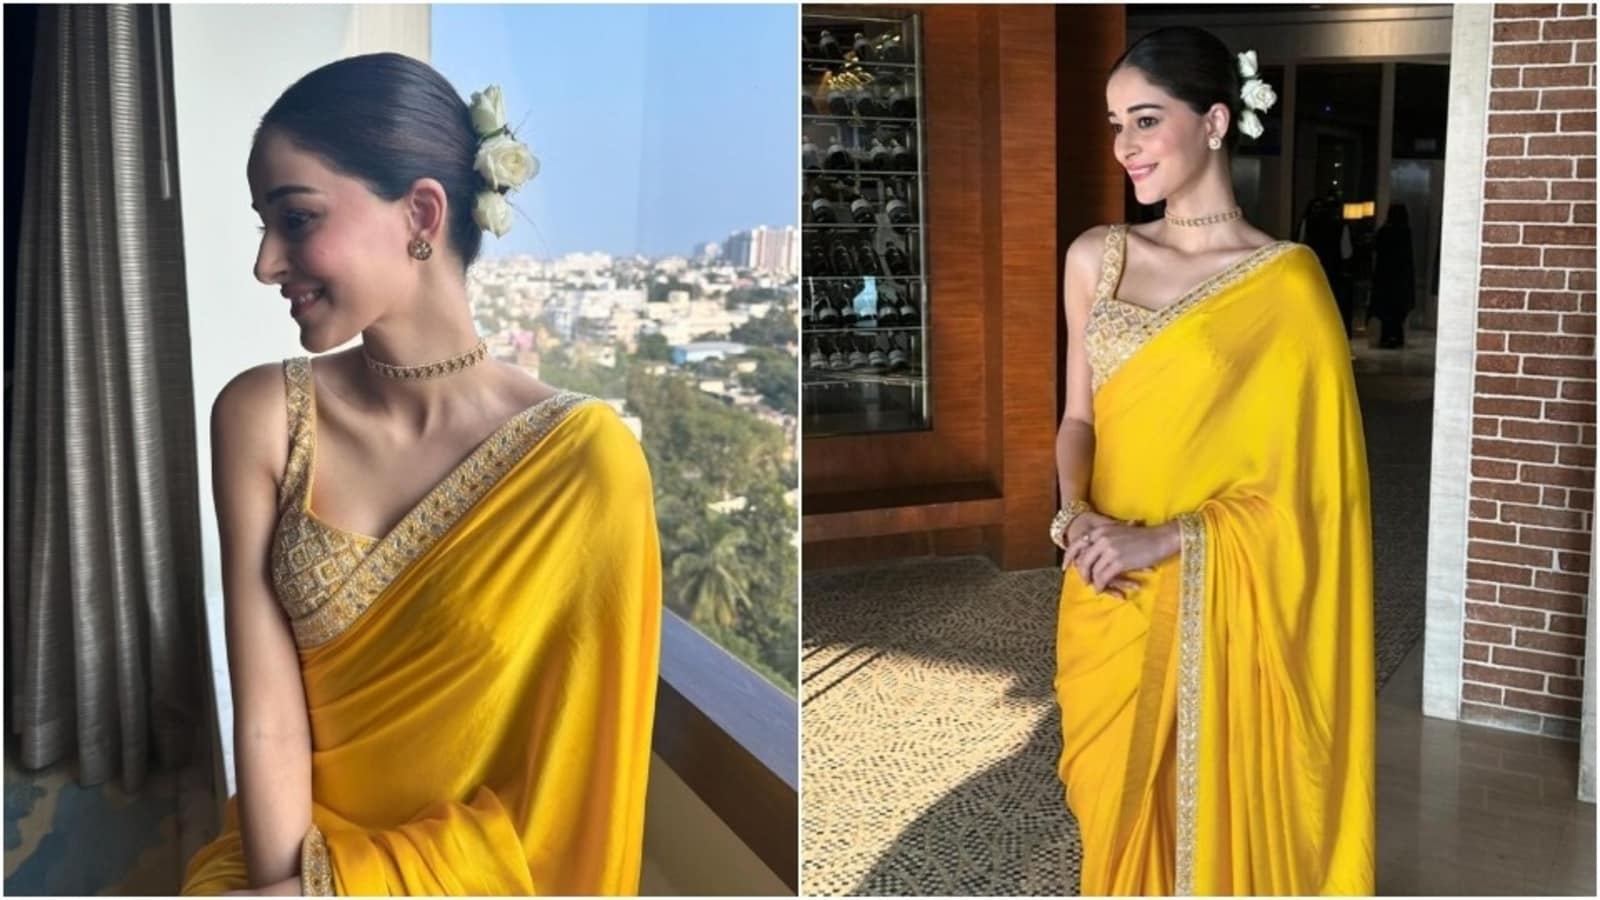 Ananya Panday dazzles in yellow saree, rose-adorned hairdo and minimal makeup during event in Chennai. See pics